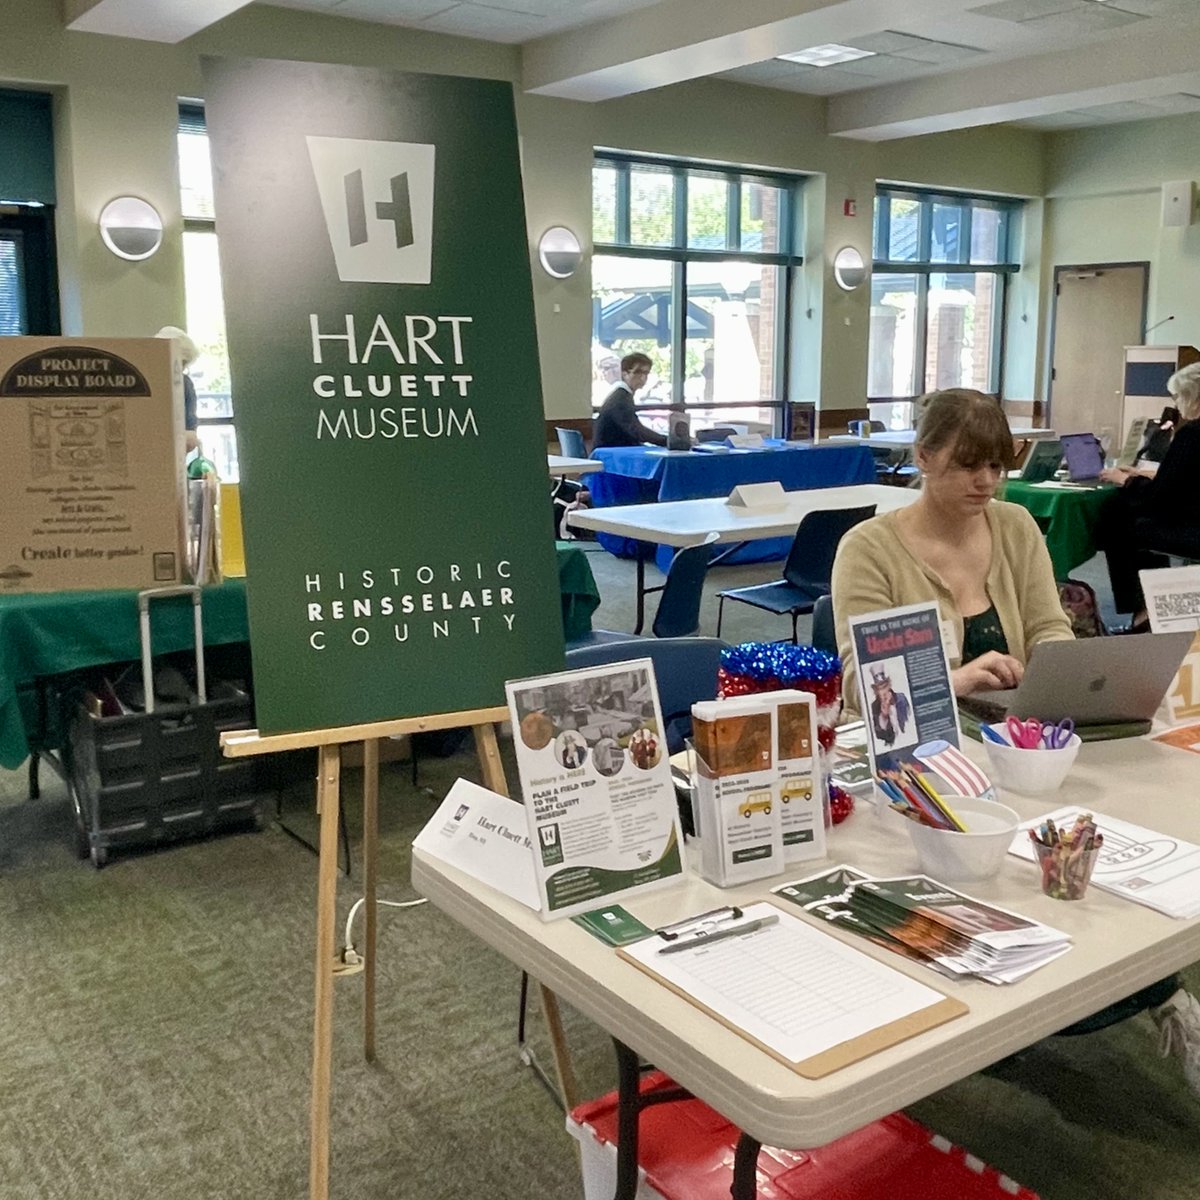 We're kicking off our #LocalHistory Fair TODAY (5/2) at Noon! Whether your interest is in genealogical research, historical interpretation, preservation, or learning about our local history, visit the Community Room between 12 and 4 p.m. #SSPL #SaratogaLibrary #SaratogaSprings